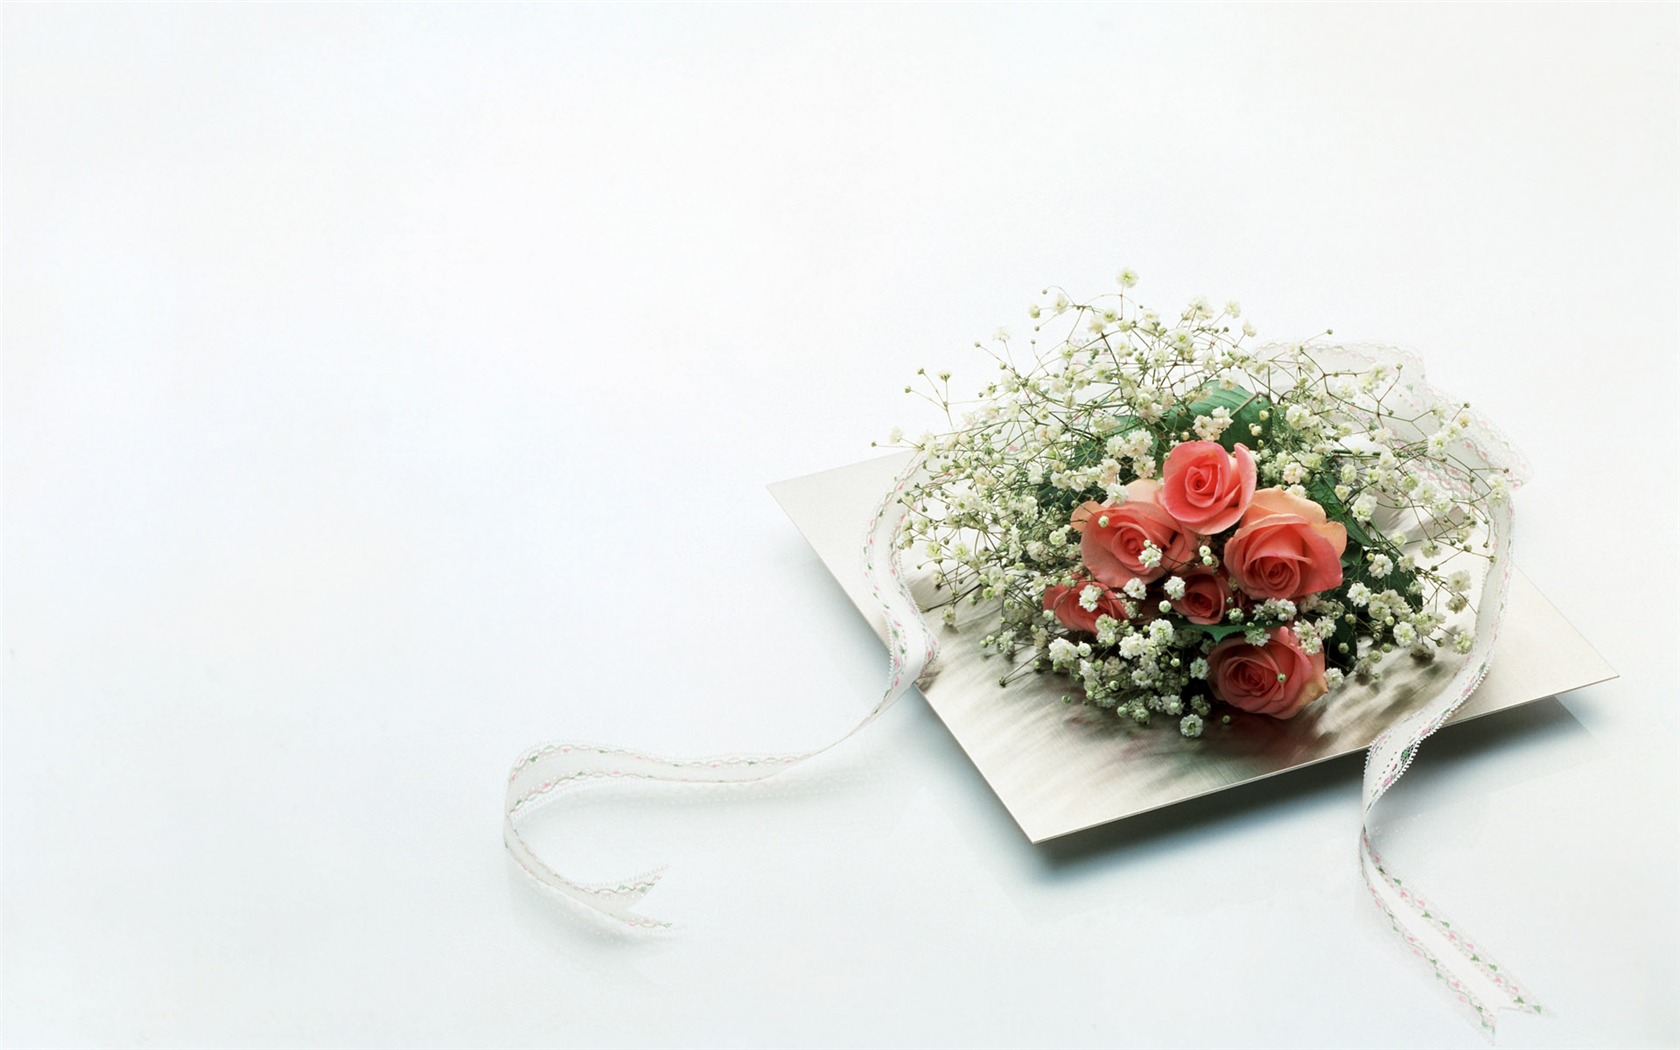 Wedding Flowers items wallpapers (2) #3 - 1680x1050